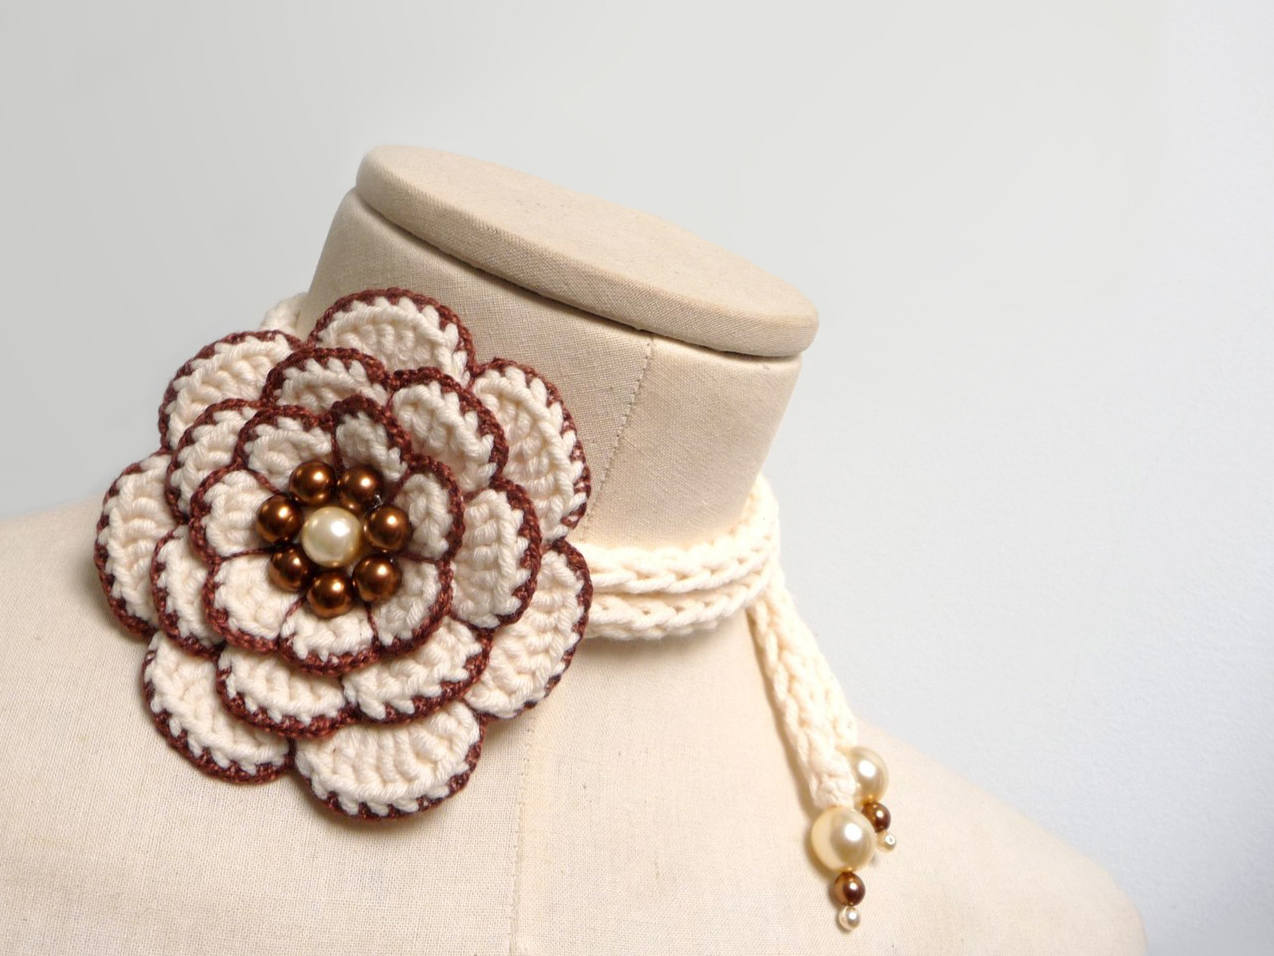 Crochet Lariat Necklace With Big Flower, White And Brown Cotton With Pearls - Full Bloom